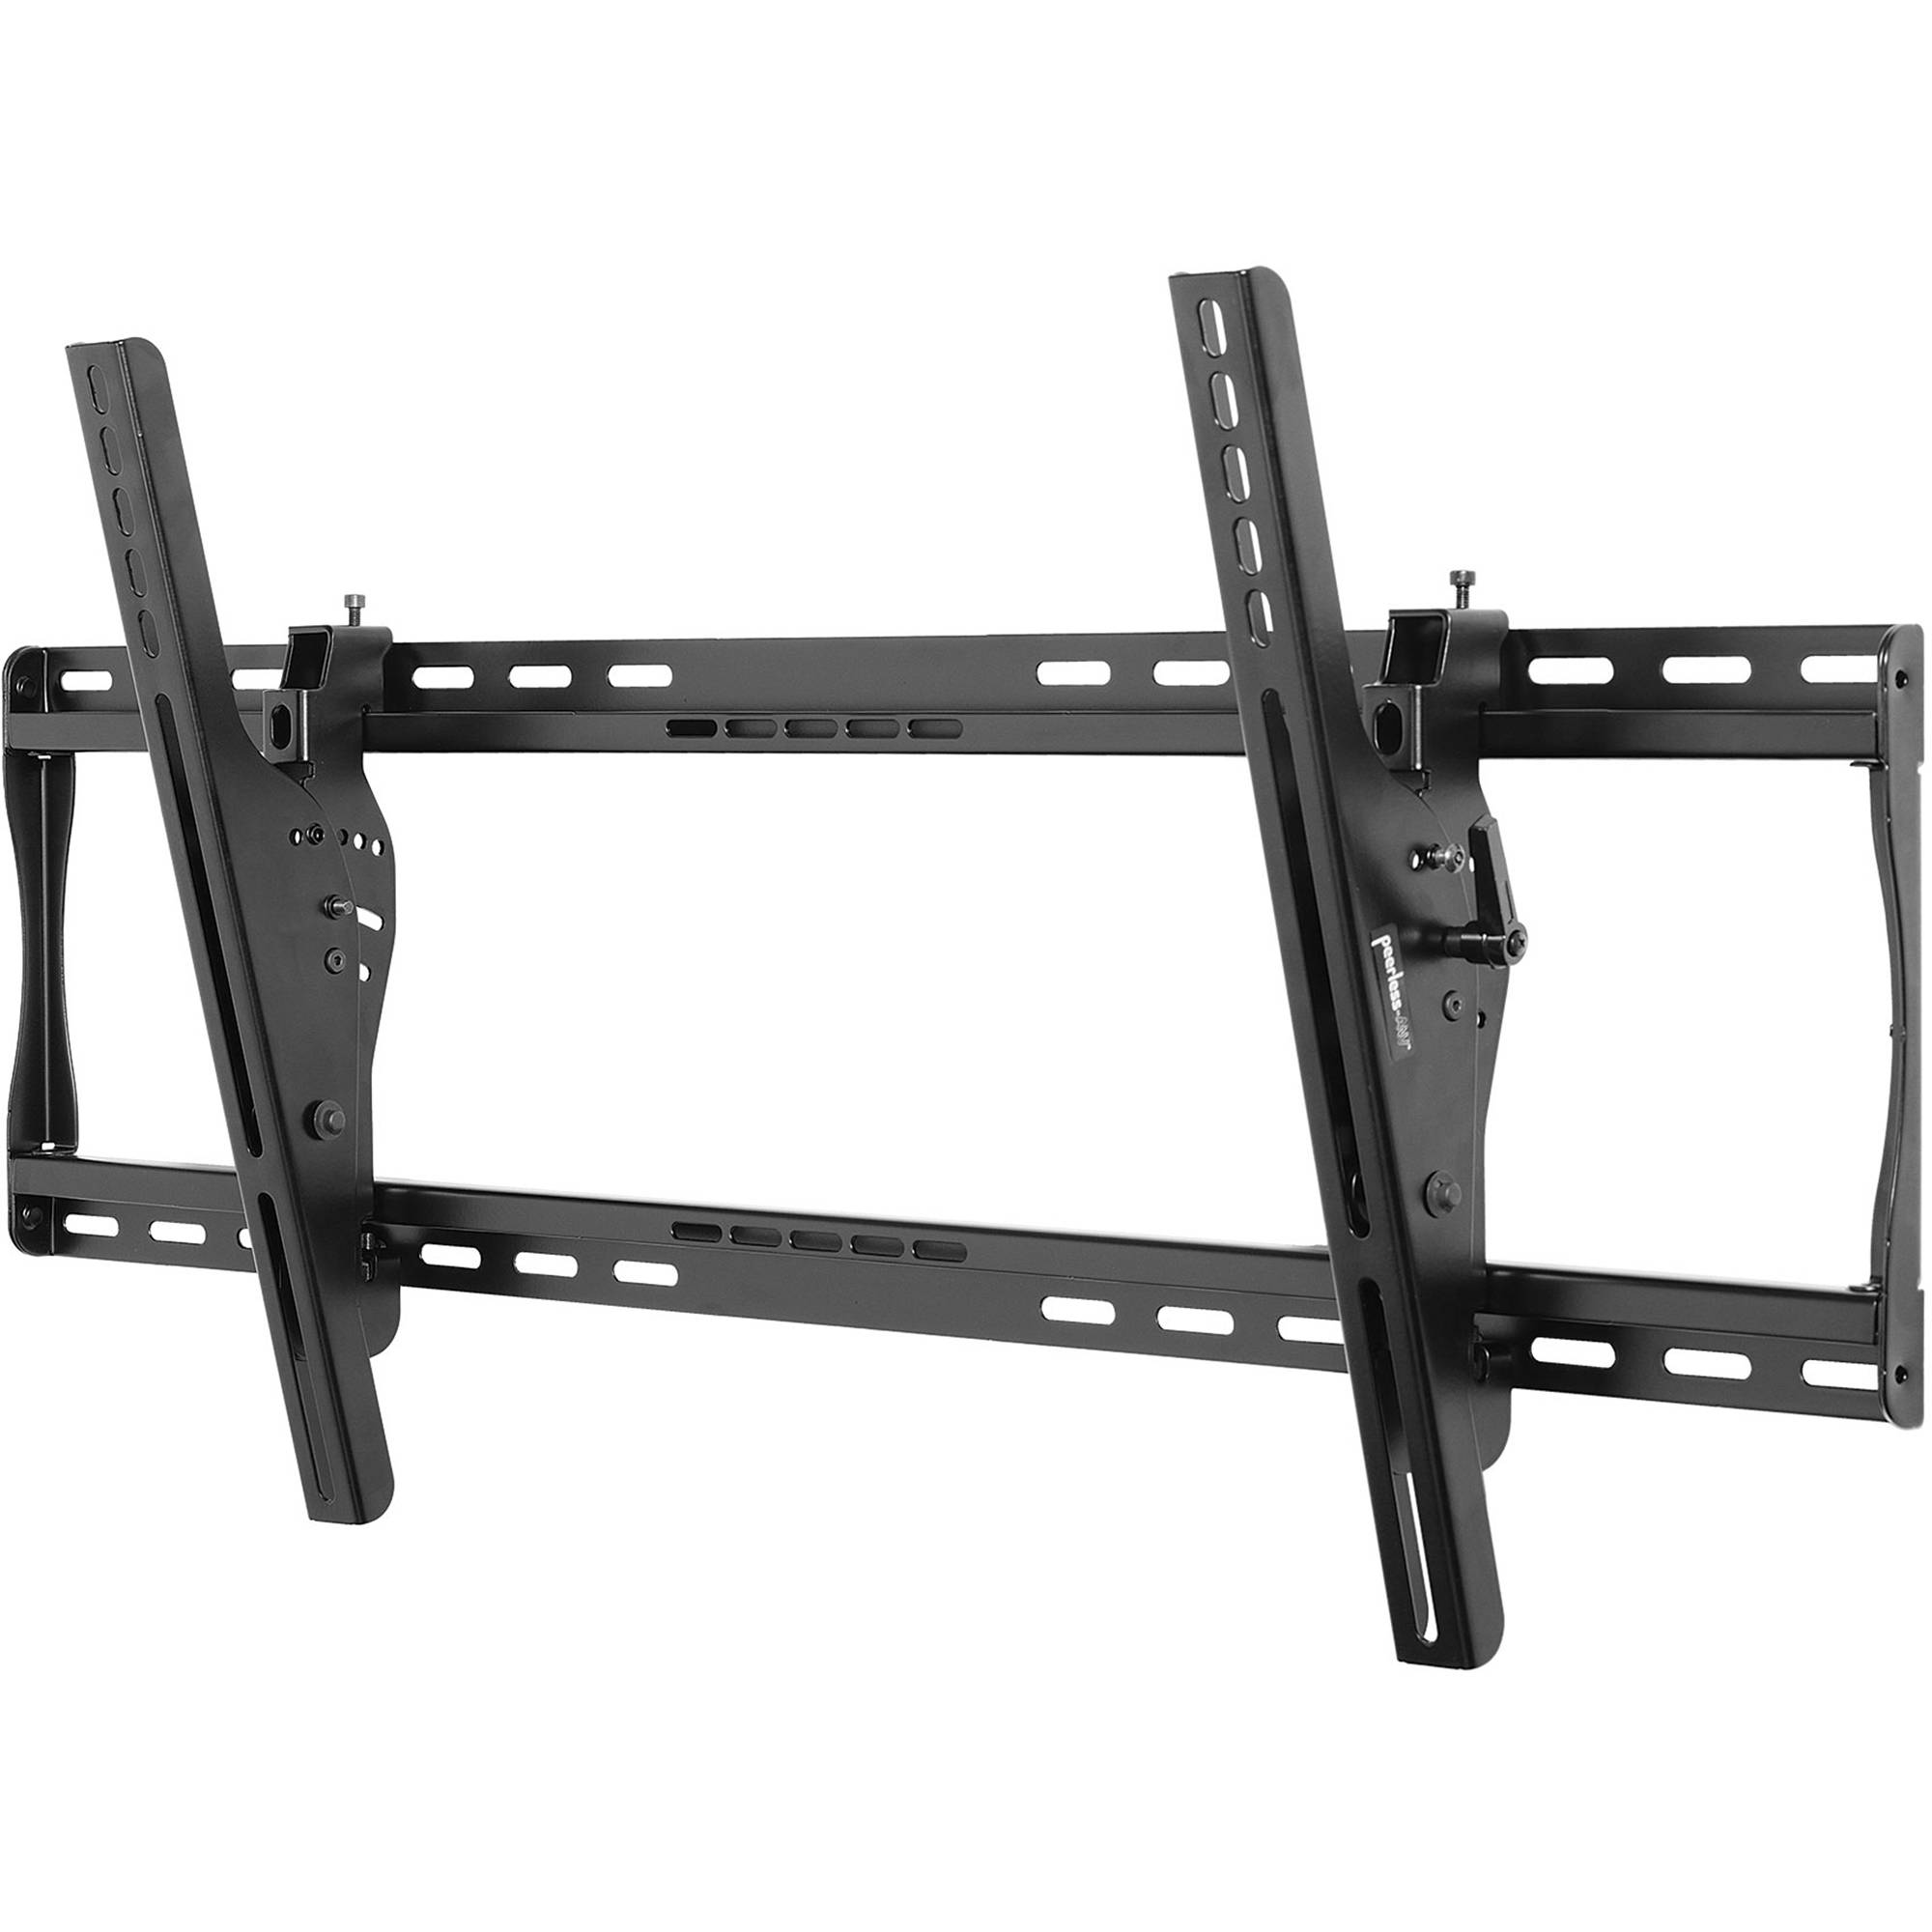 ST660P | Universal Tilt Wall Mount for 39" to 80" Flat Panel Displays